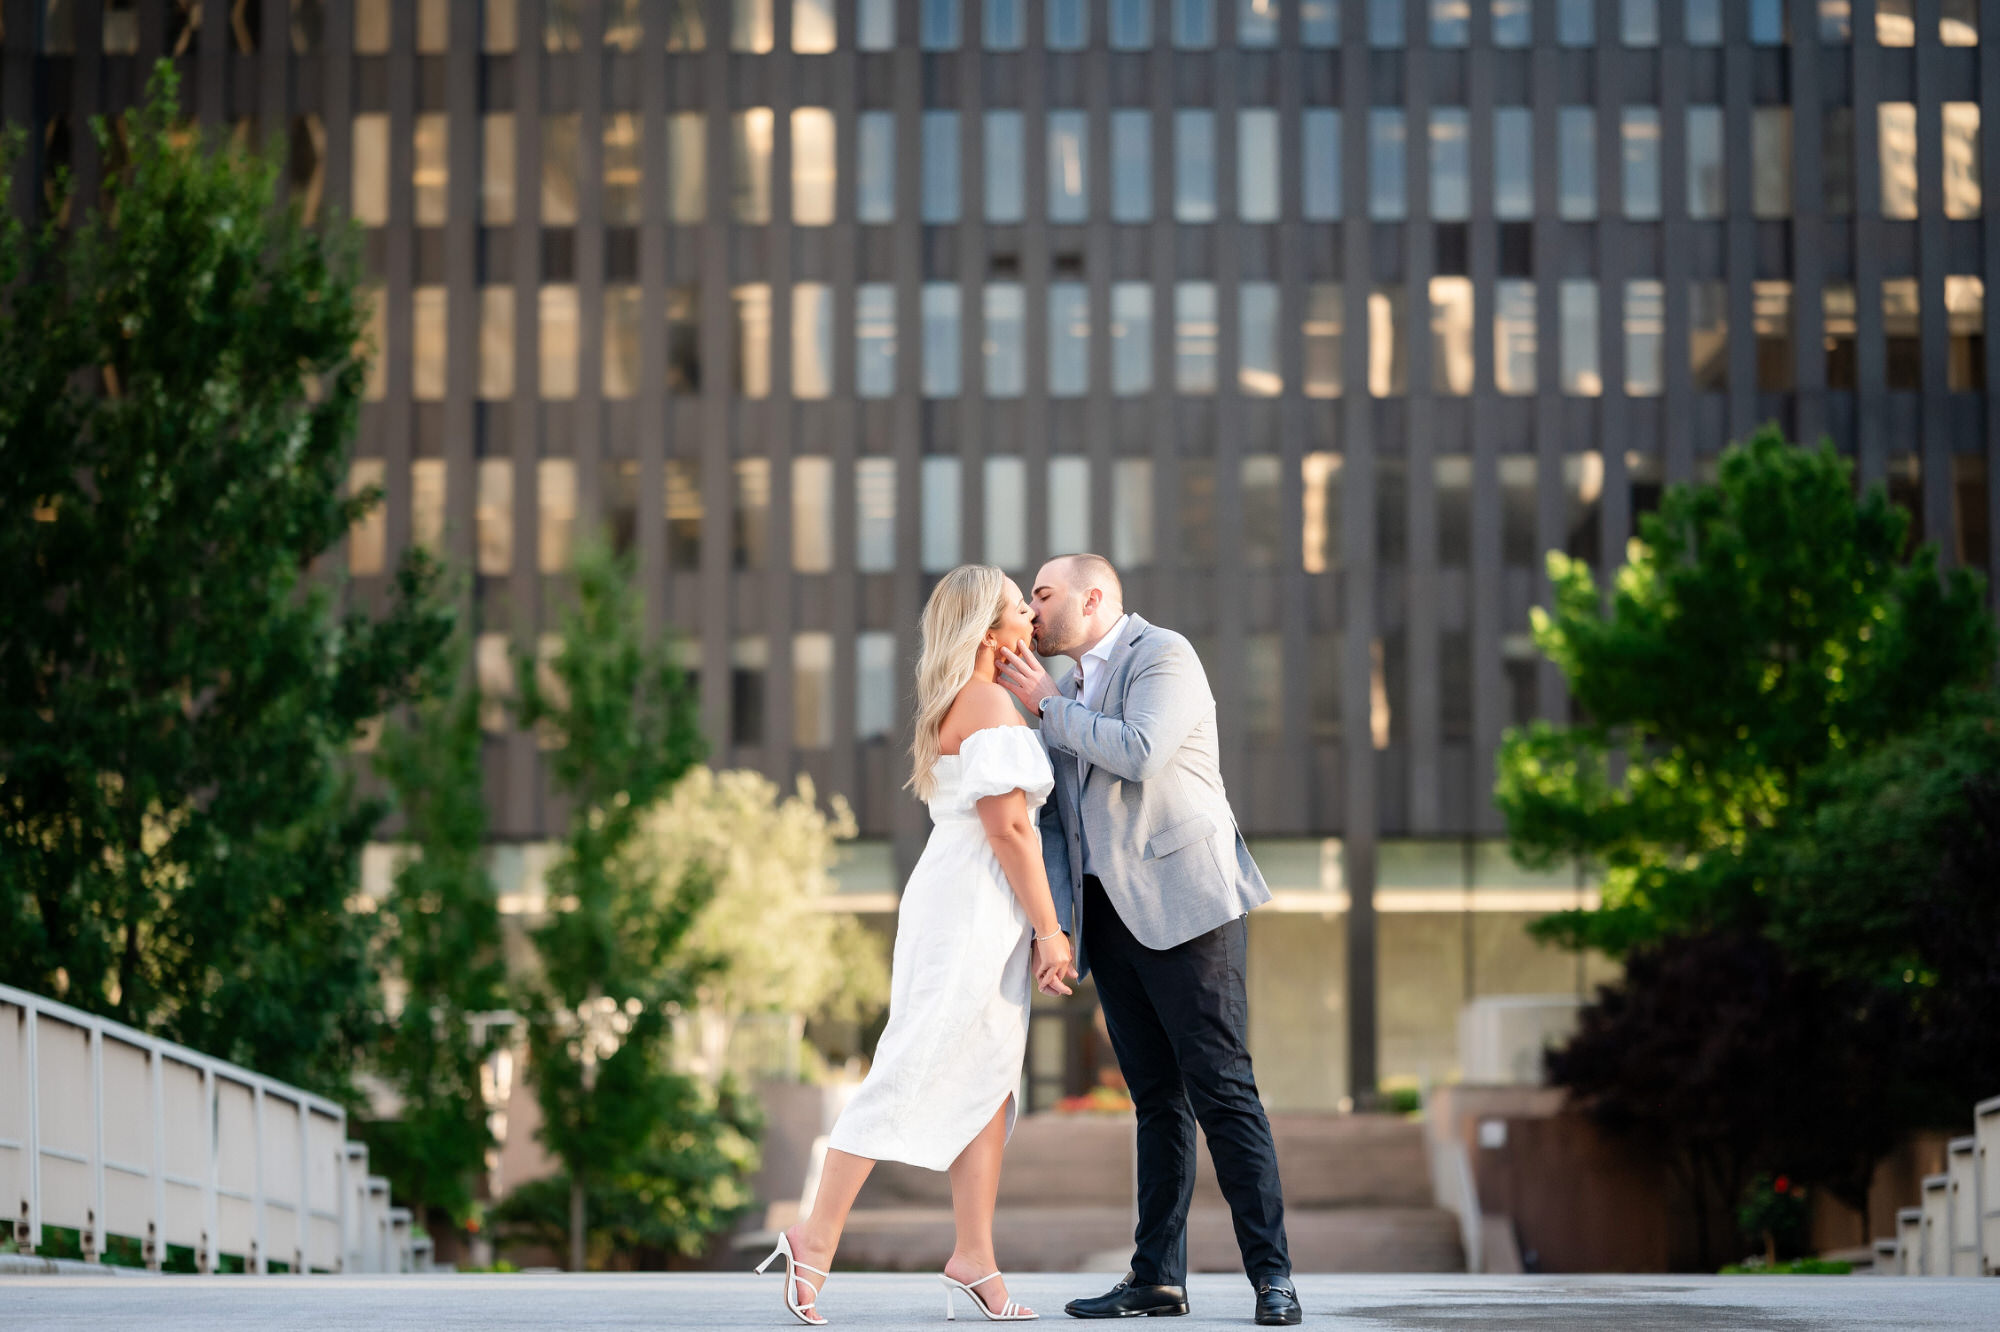 downtown PPG plaza engagement photo • Engagement Photography - Leeann Marie Photographer Pittsburgh